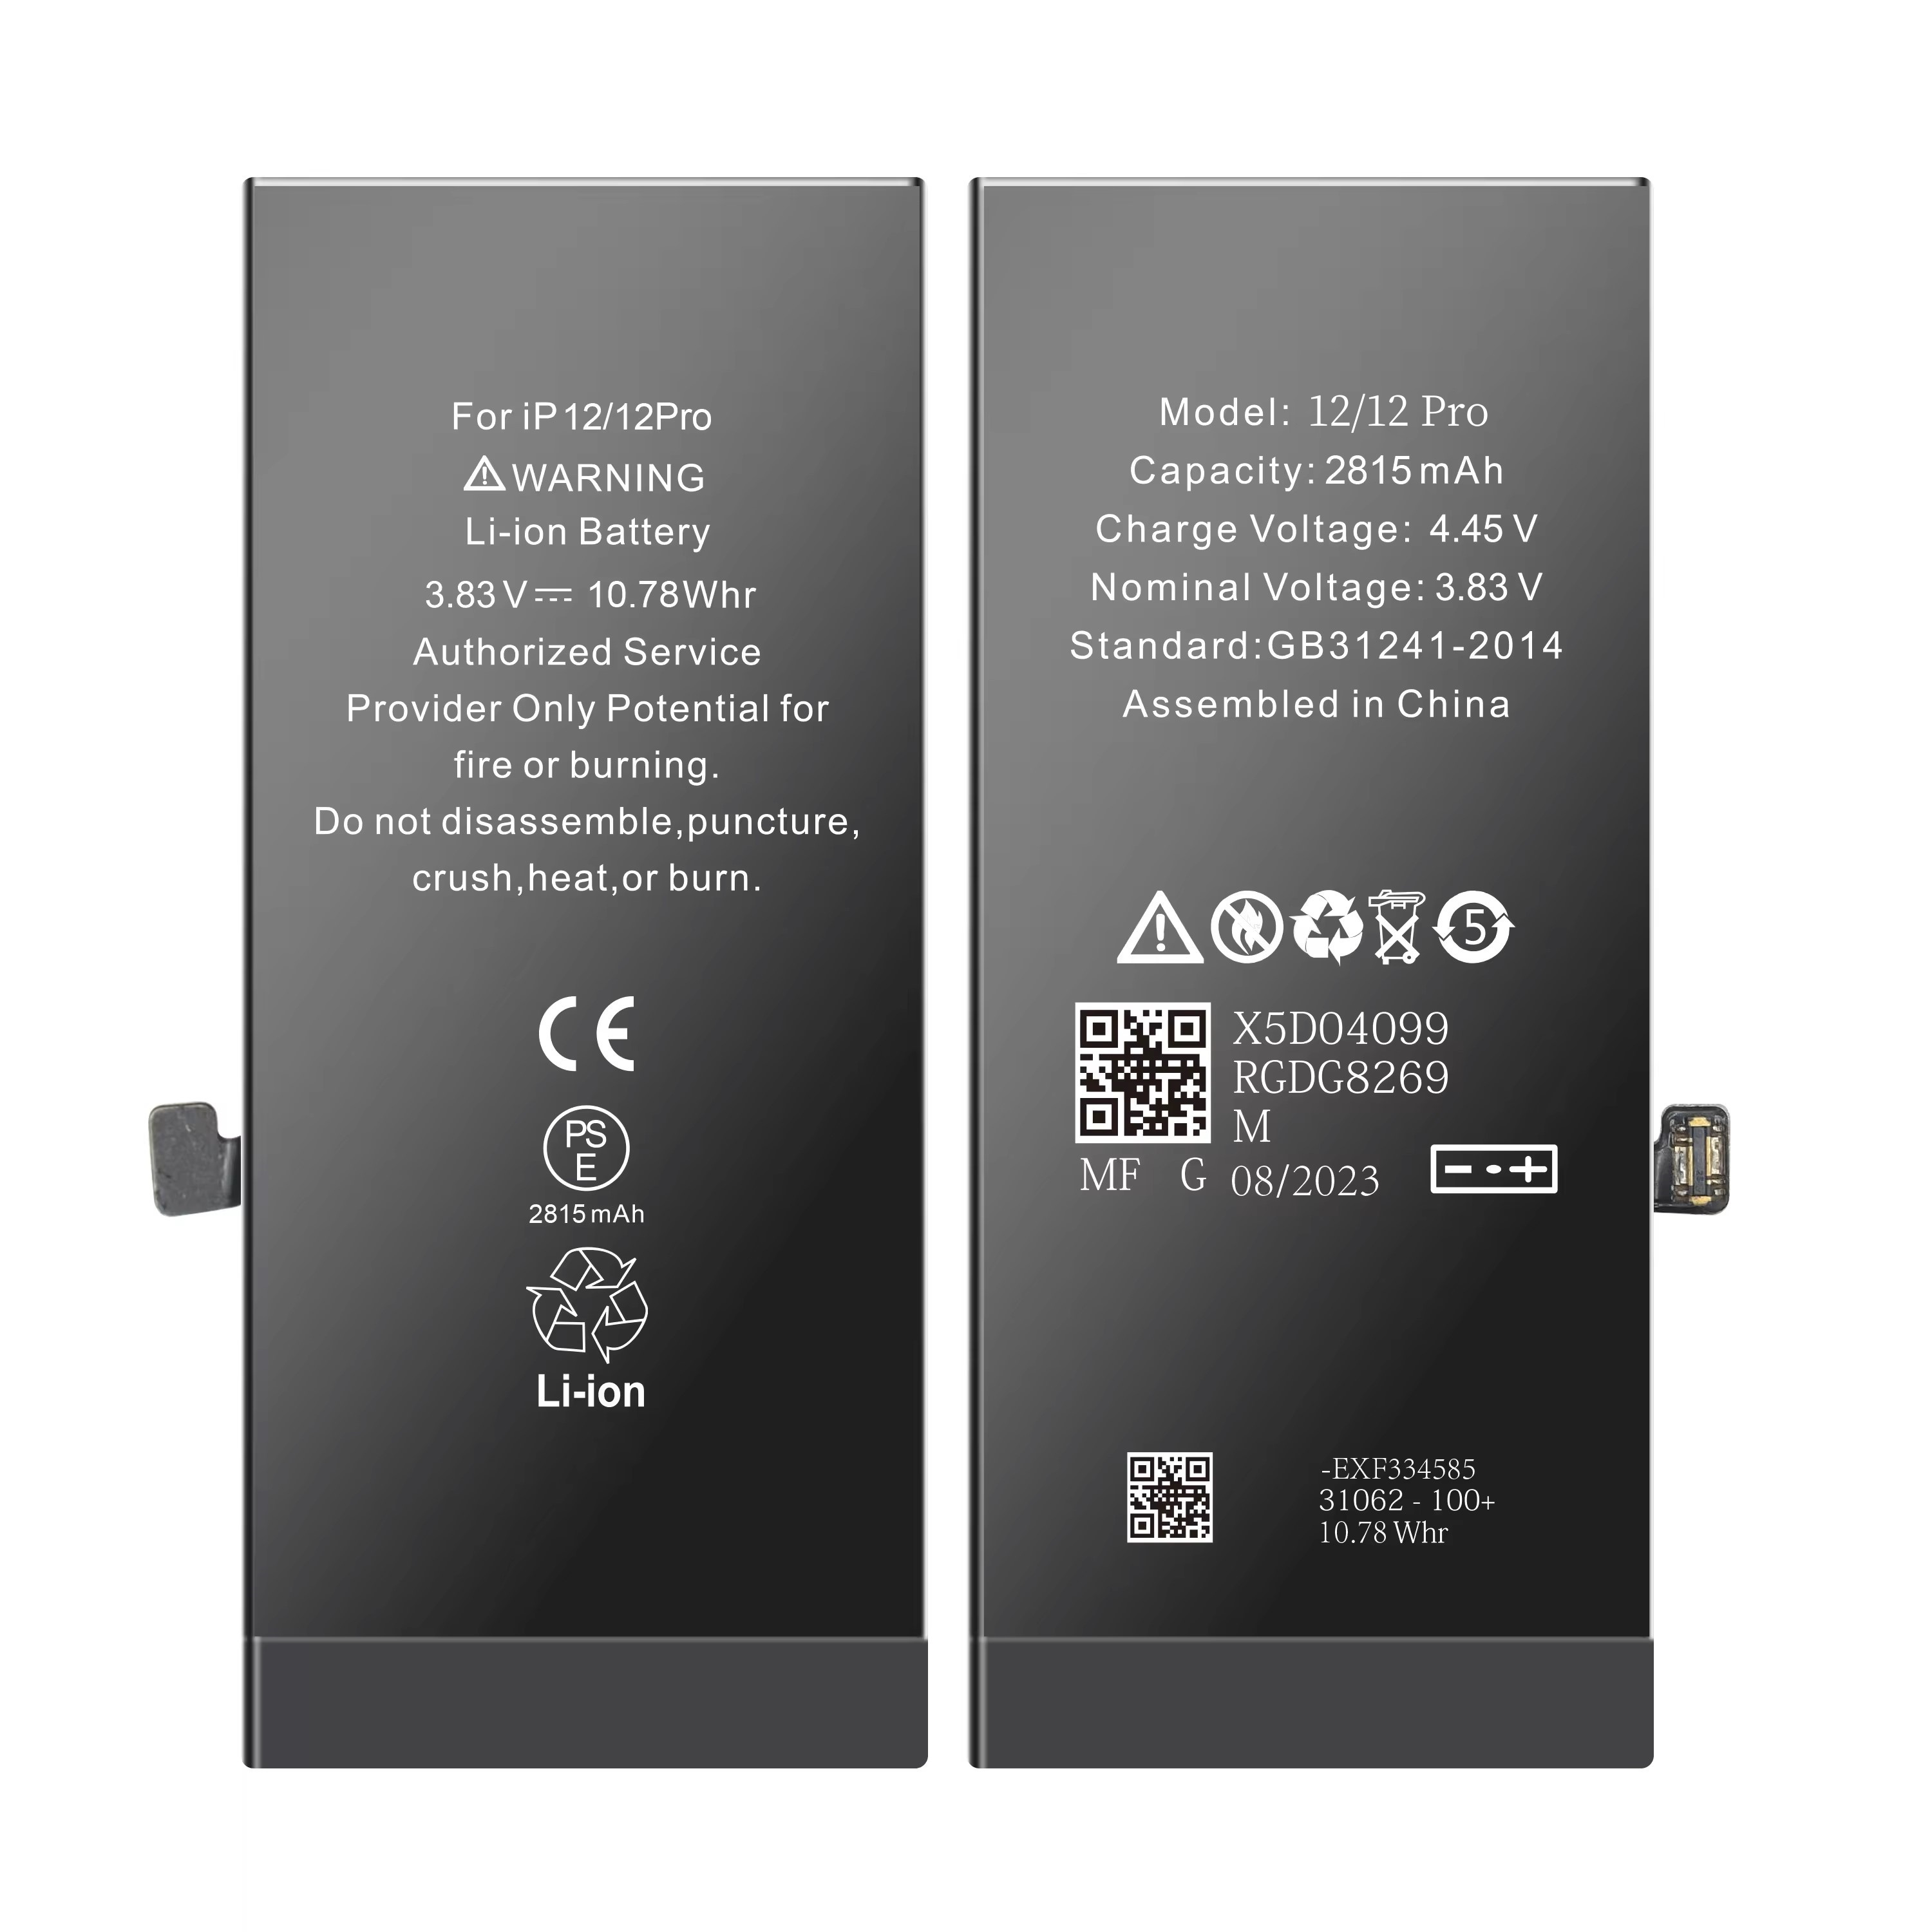 Iphone 12/12 pro battery